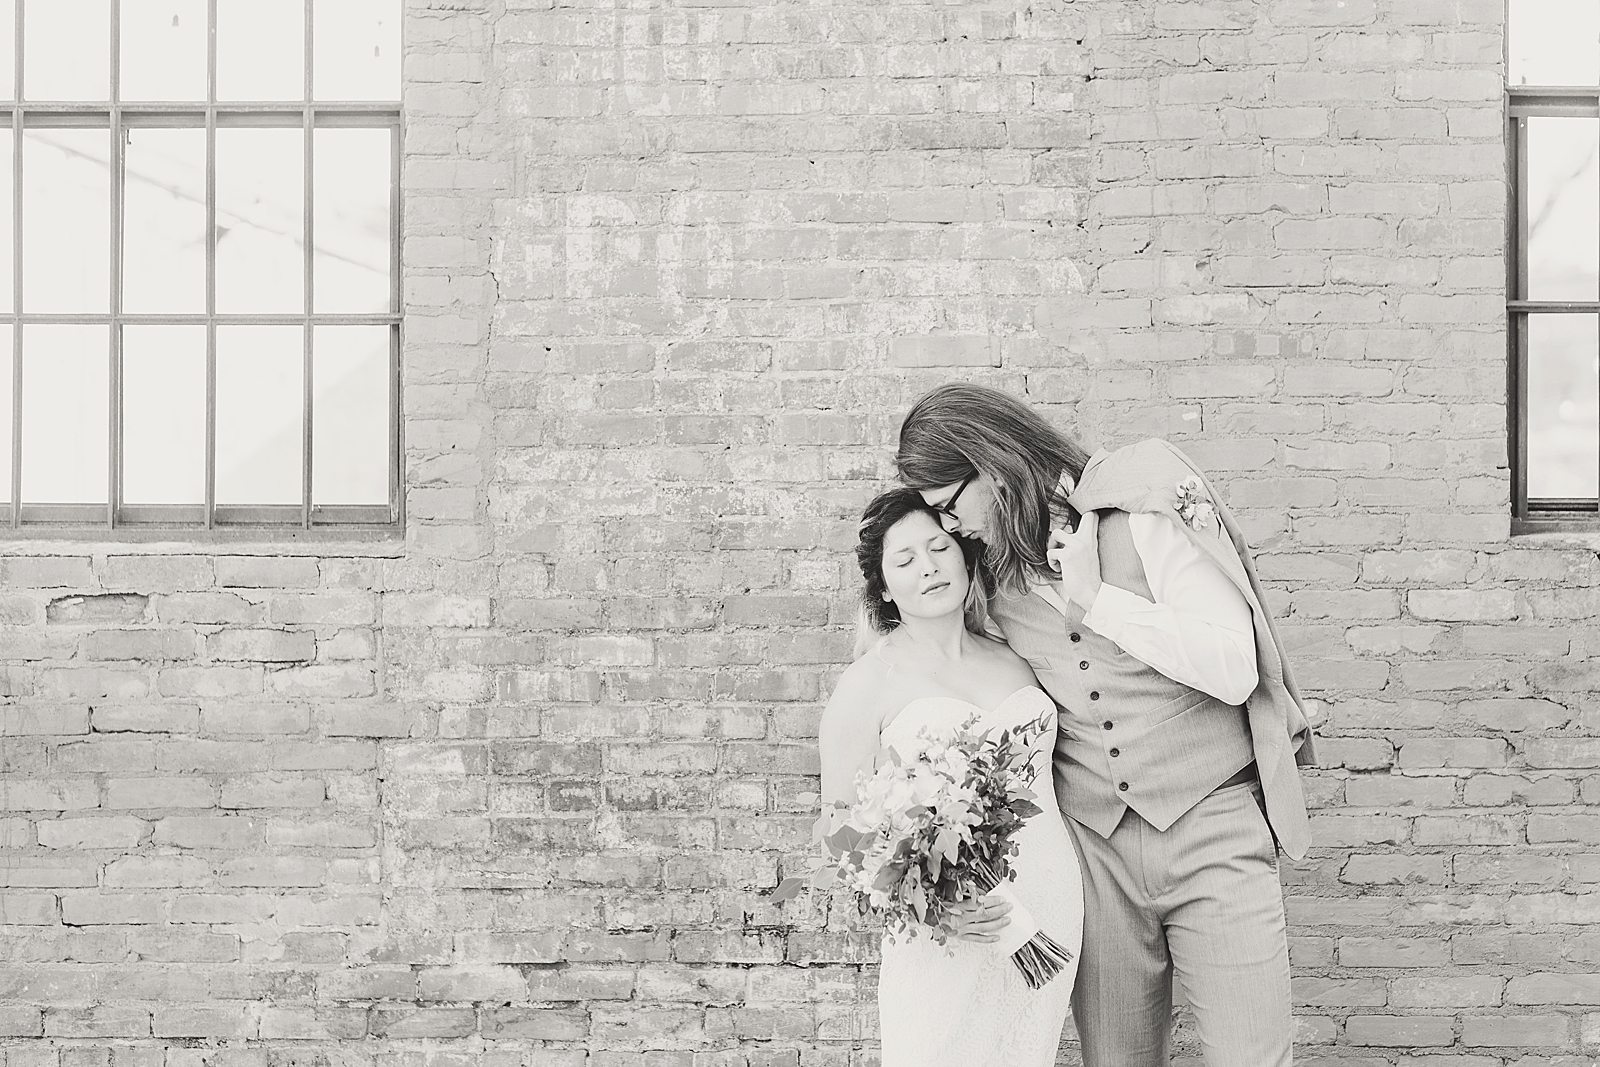 Hackney Warehouse Wedding Black and White of Groom Nuzzling Bride in Front of Brick Wall Photo